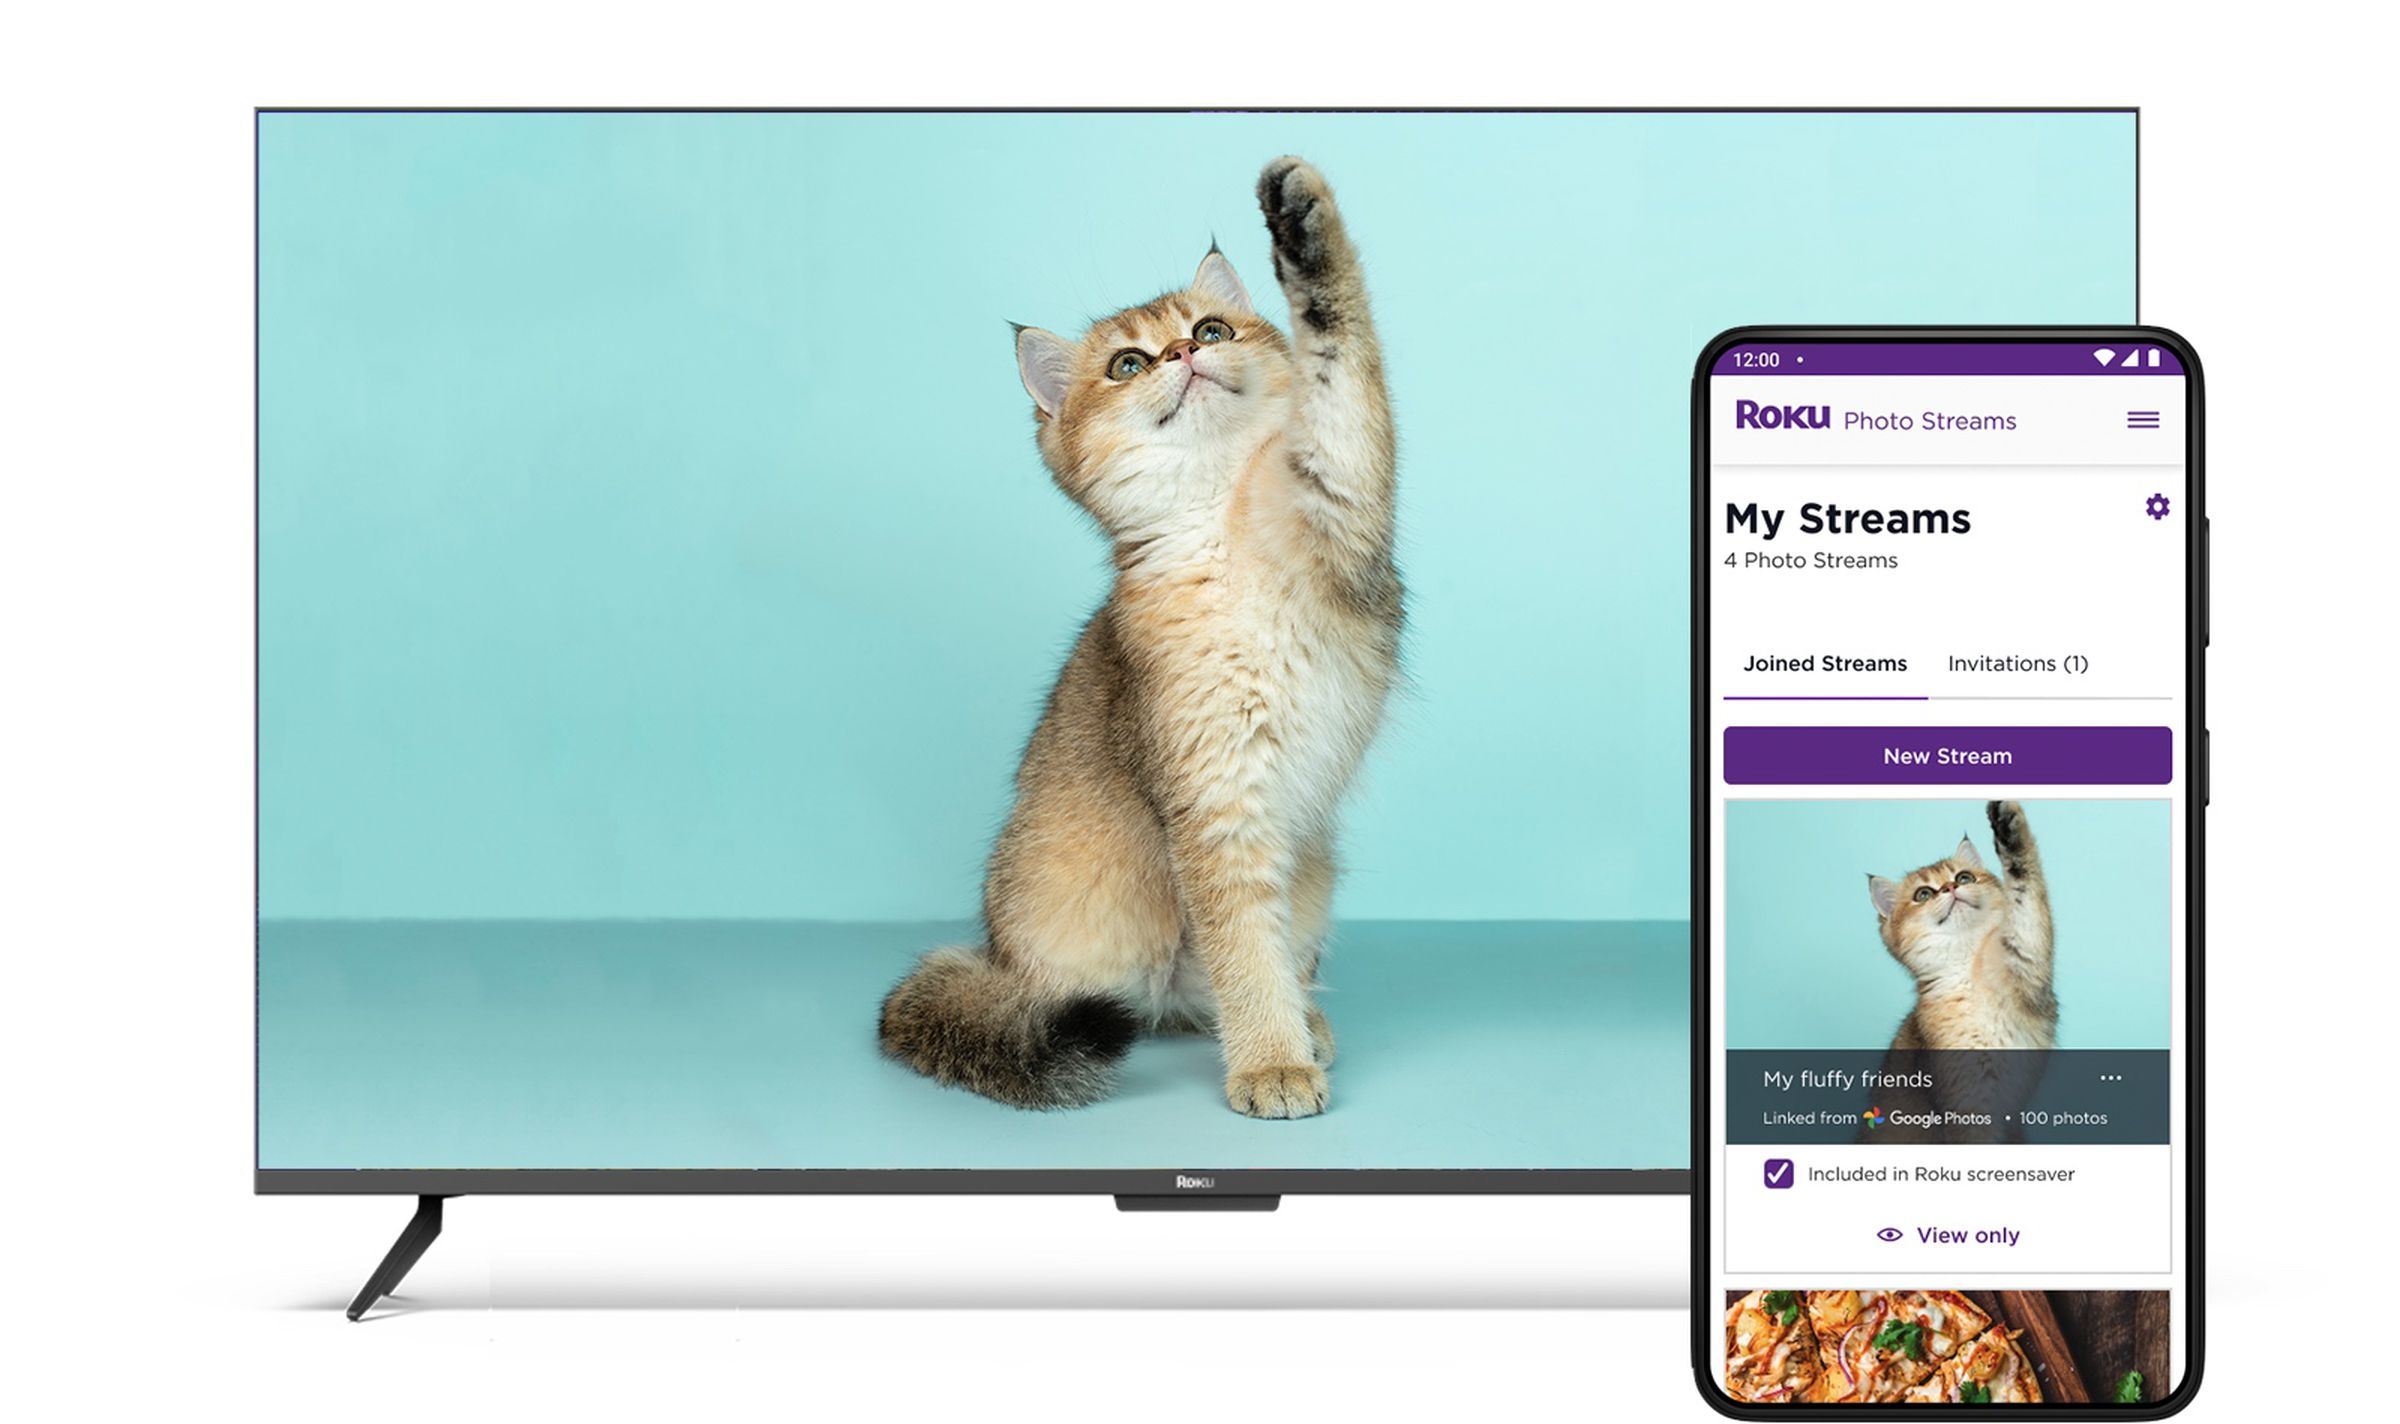 An image showing Google Photos support on Roku photo streams.